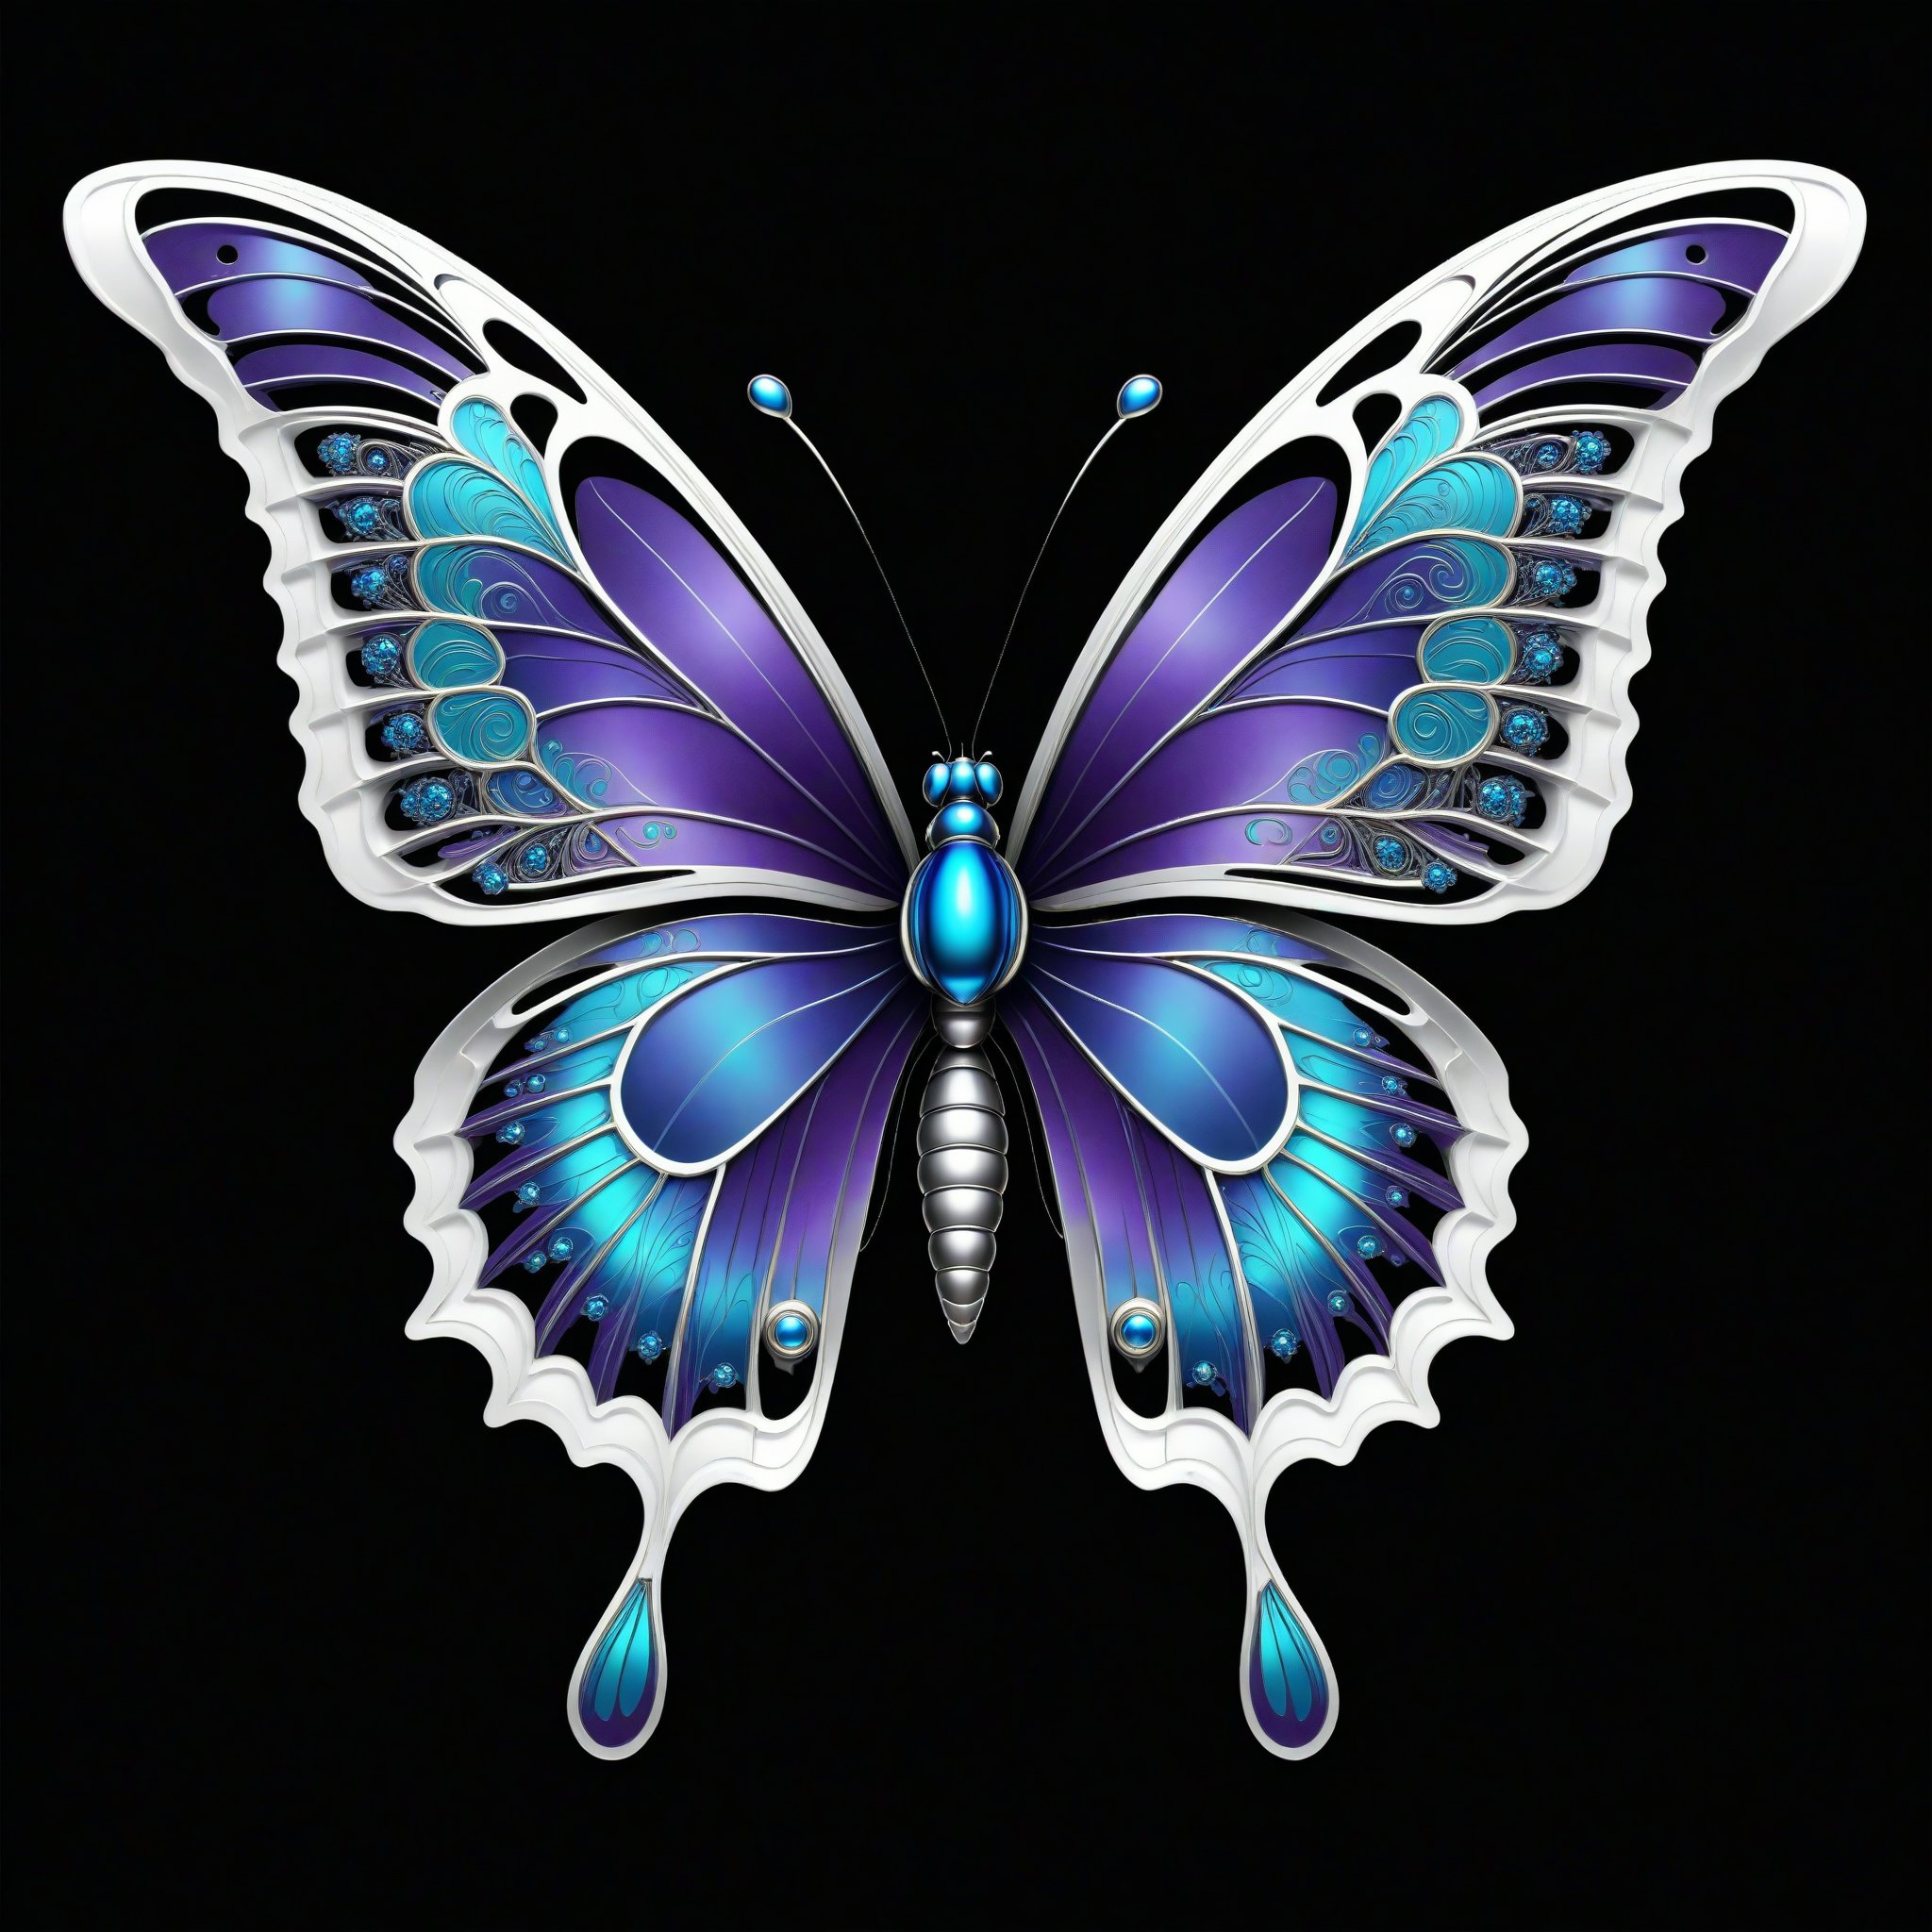 a butterfly iridicent whit clasic ornament Mechanical lines Elegance T-shirt design, BLACK BACKGROUND